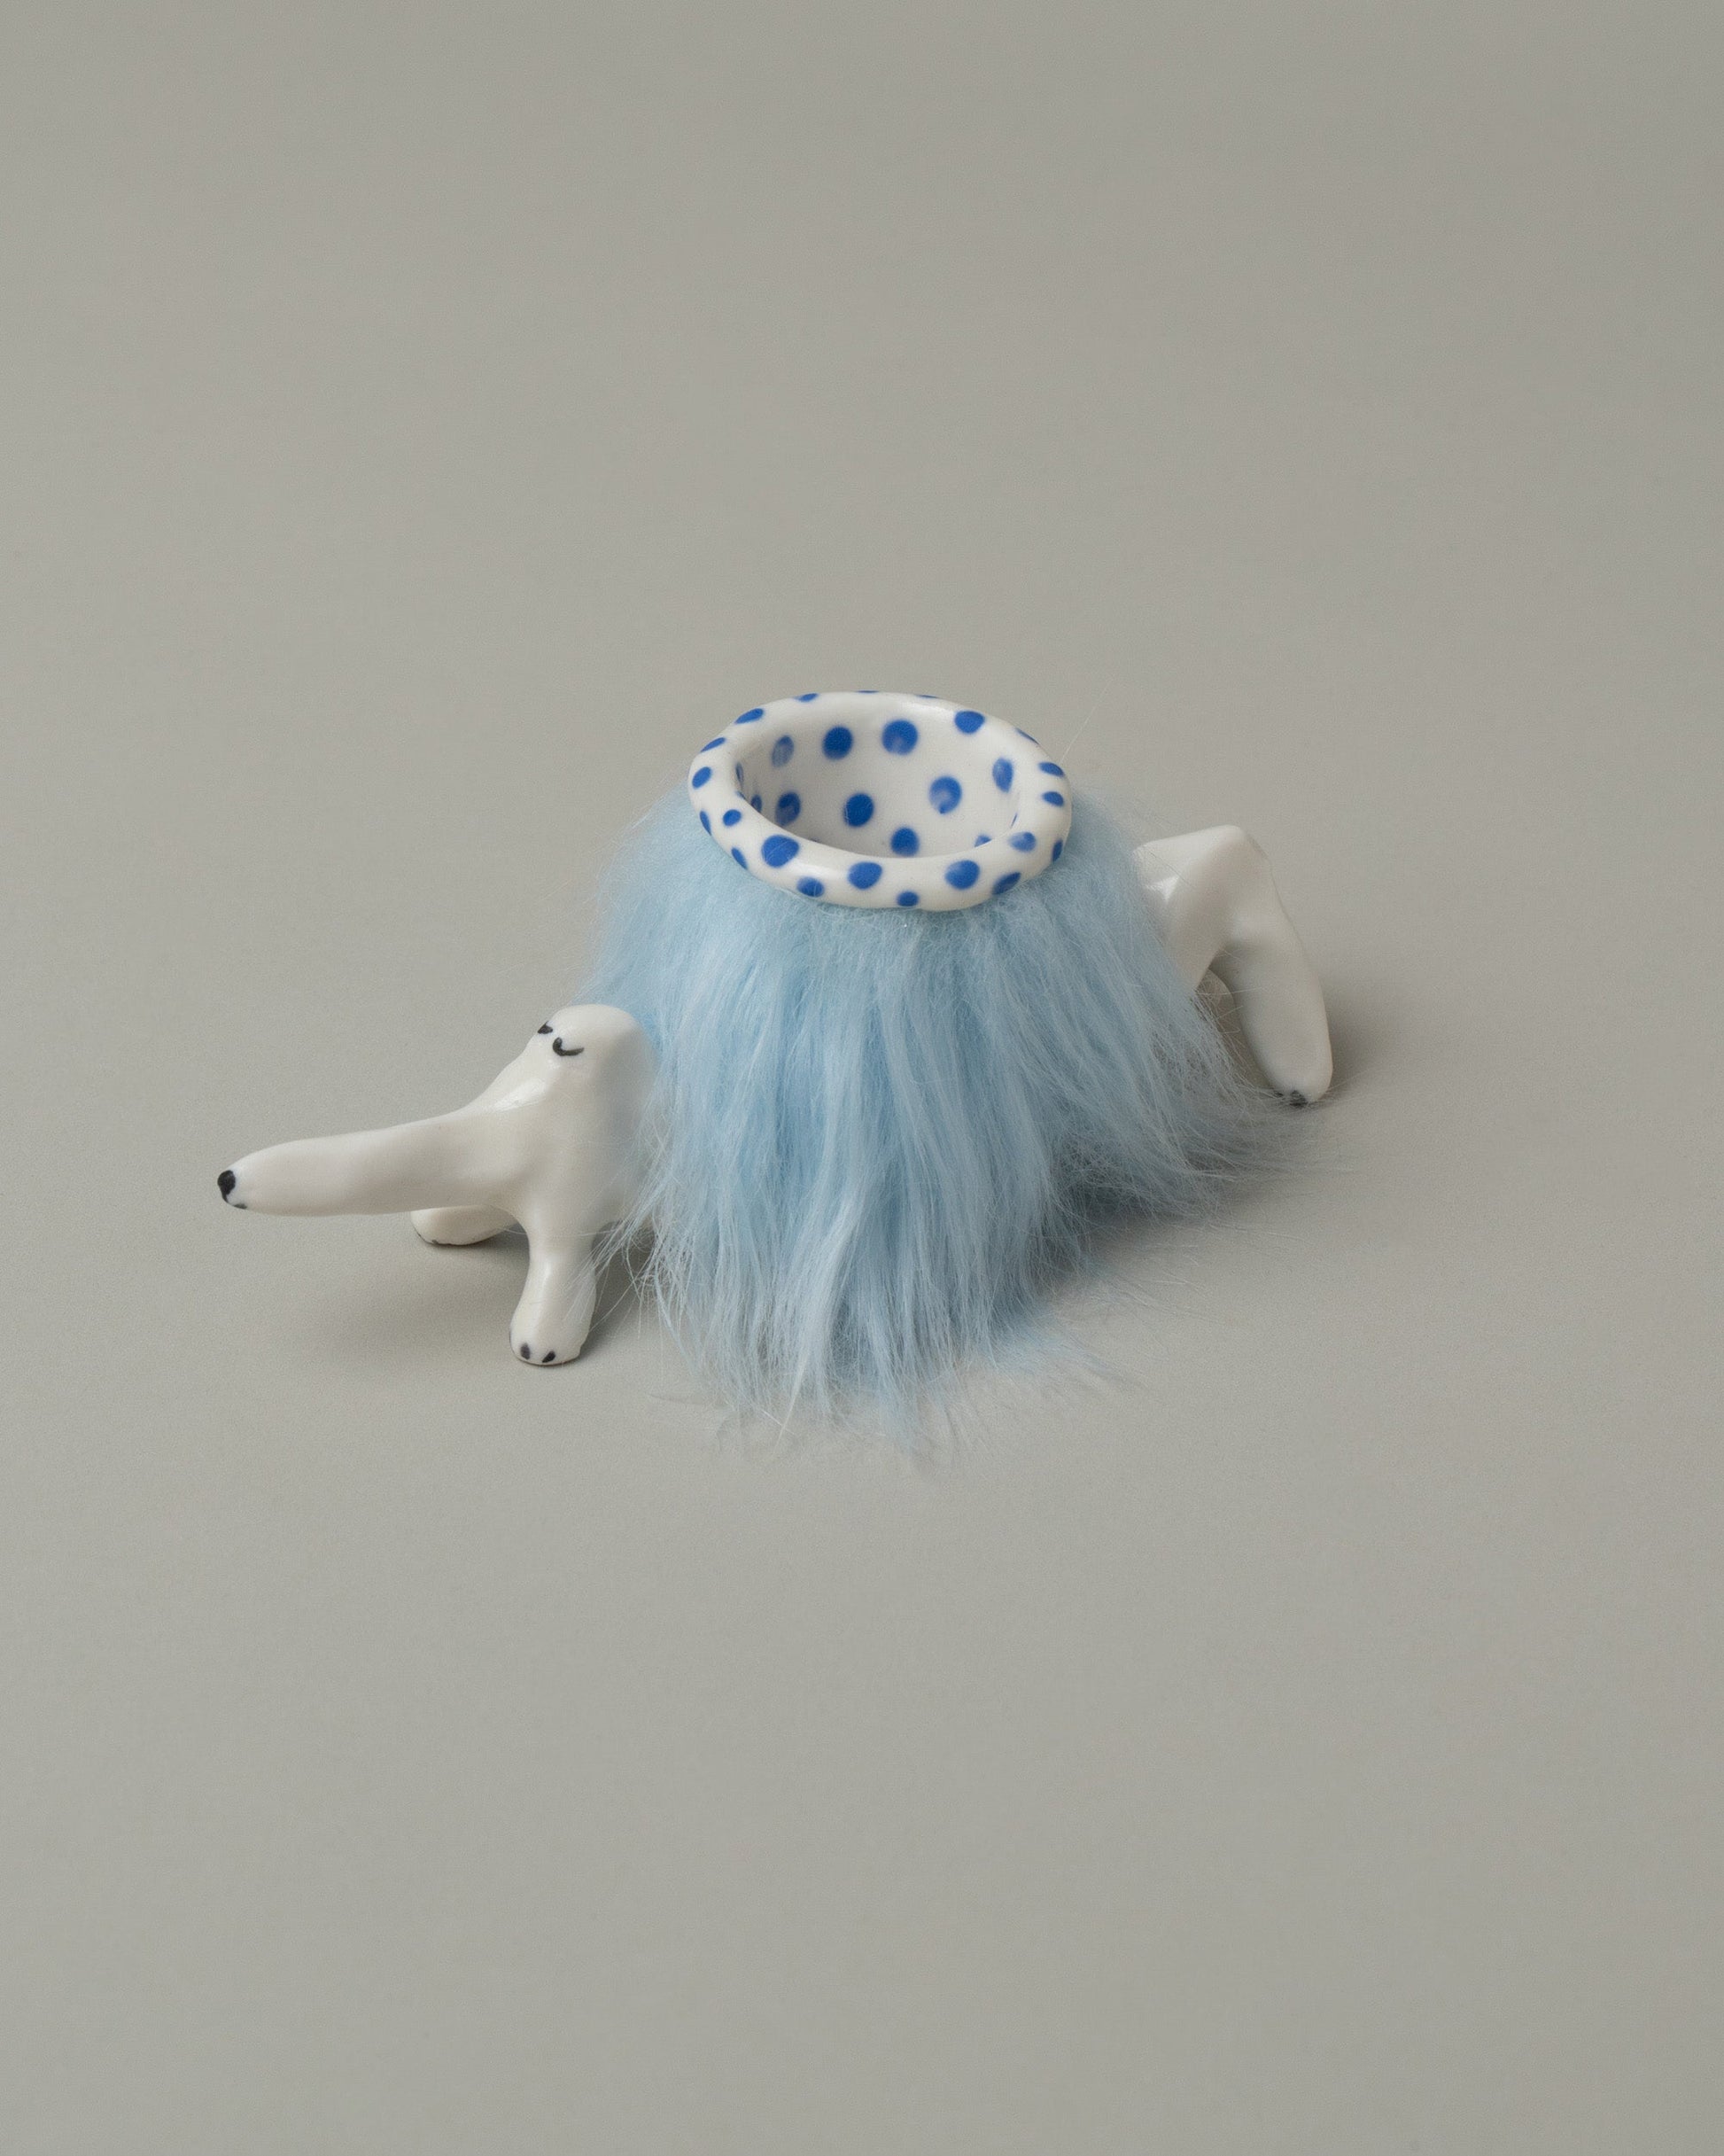 Closeup detail of the Eleonor Boström Blue Furry Baggage Dog on light color background.